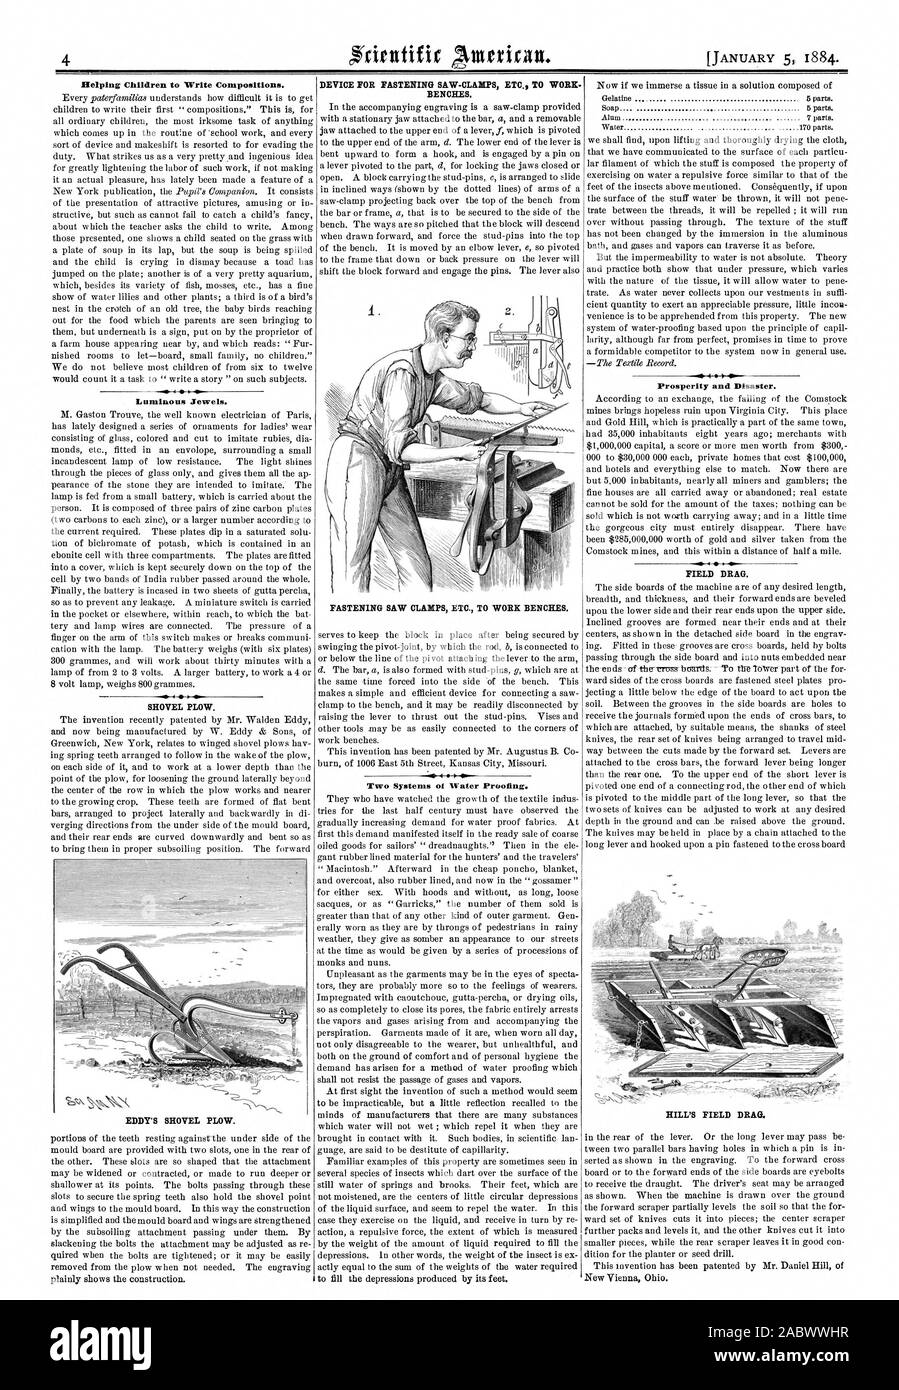 Helping Children to Write Compositions. L mnino us Jewels. SHOVEL PLOW. DEVICE FOR FASTENING SAW-CLAMPS ETC. TO WORK BENCHES. FASTENING SAW CLAMPS ETC. TO WORK BENCHES. 1 Two Systems ol Water Proofing. IS ID. Prosperity and Disaster. FIELD DRAG. HILL'S FIELD DRAG. EDDY'S SHOVEL PLOW., scientific american, 1884-01-05 Stock Photo